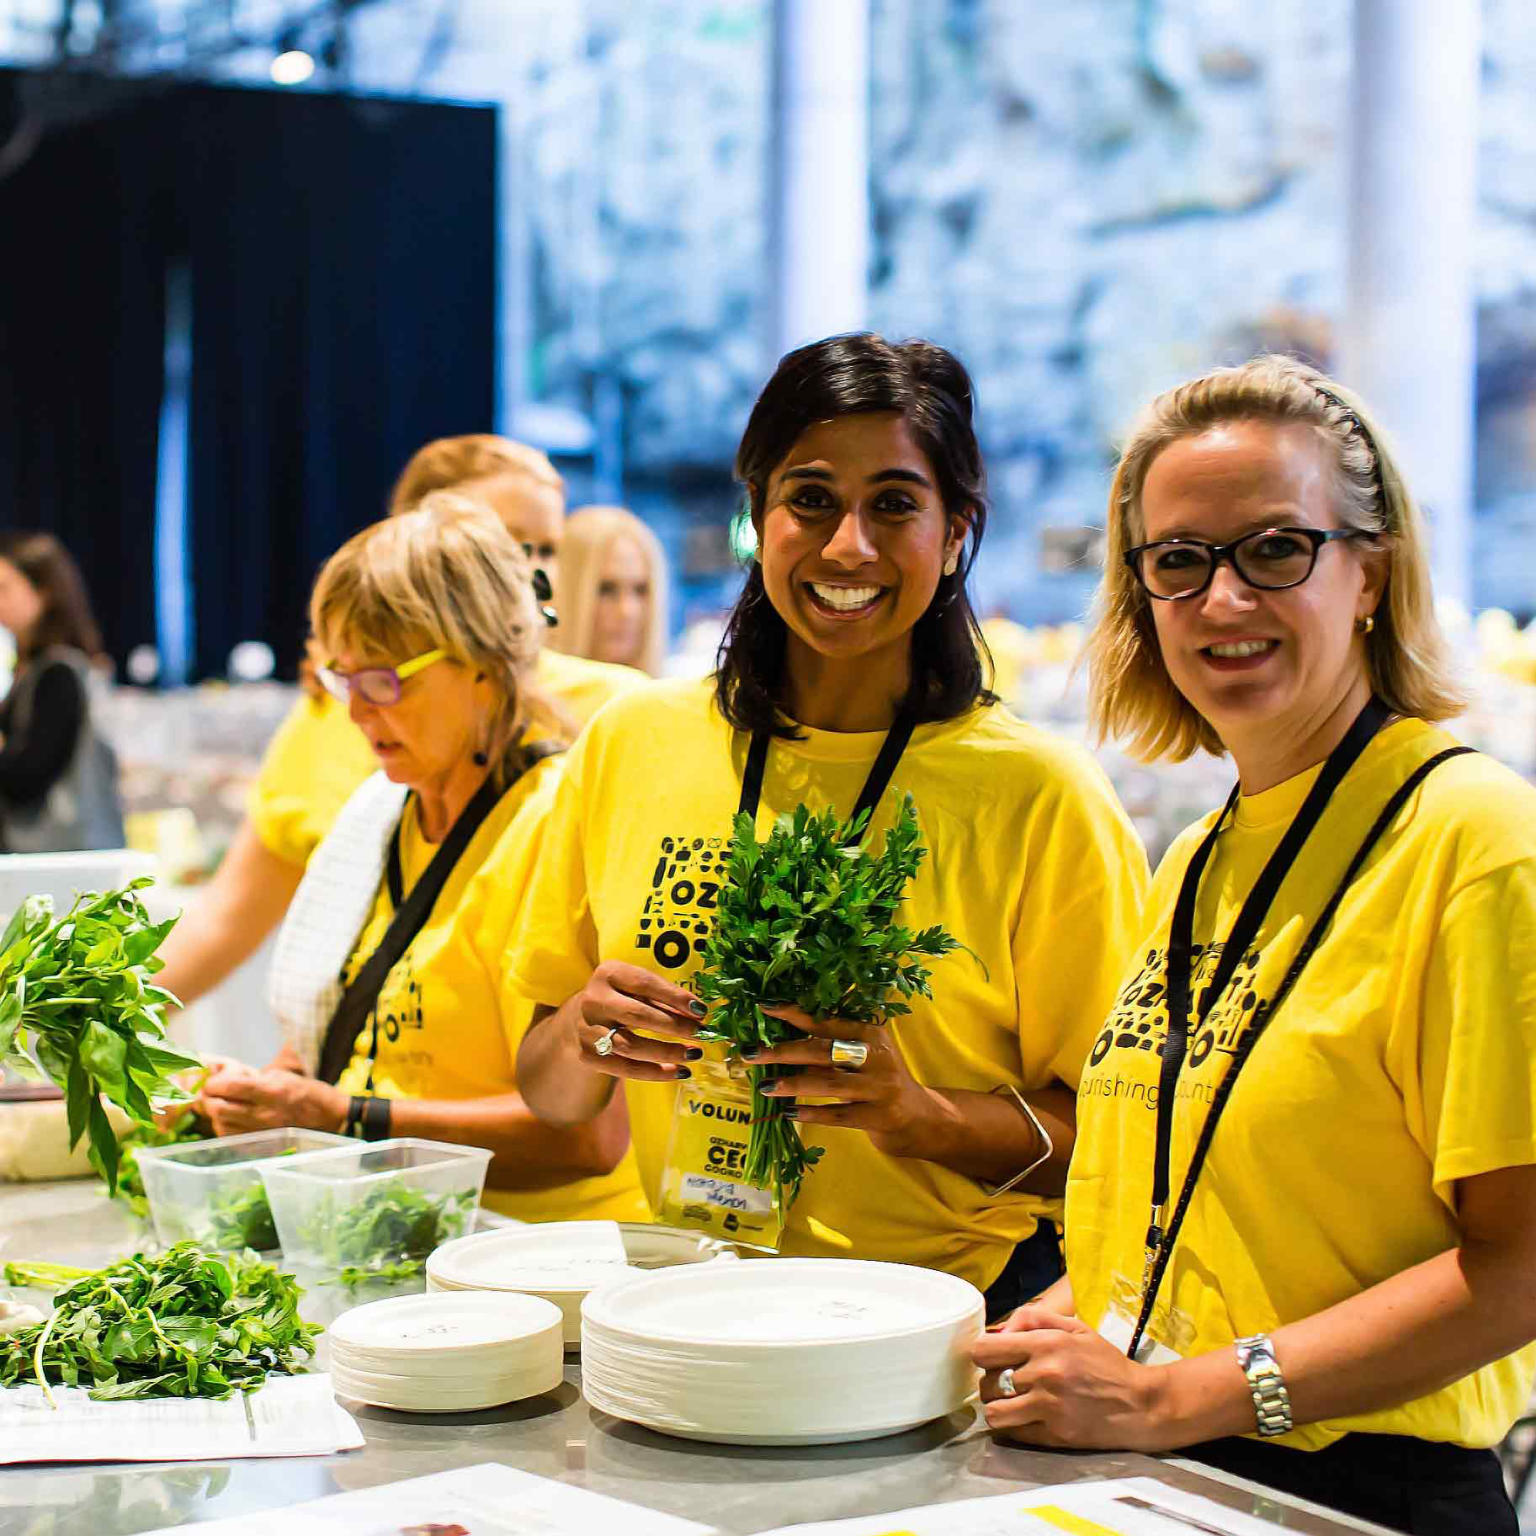 Two woman smile at camera wearing yellow t-shirts. They are preparing food at a table. One woman is holding a bunch of green herbs. More people are in the background also wearing yellow t-shirts. 